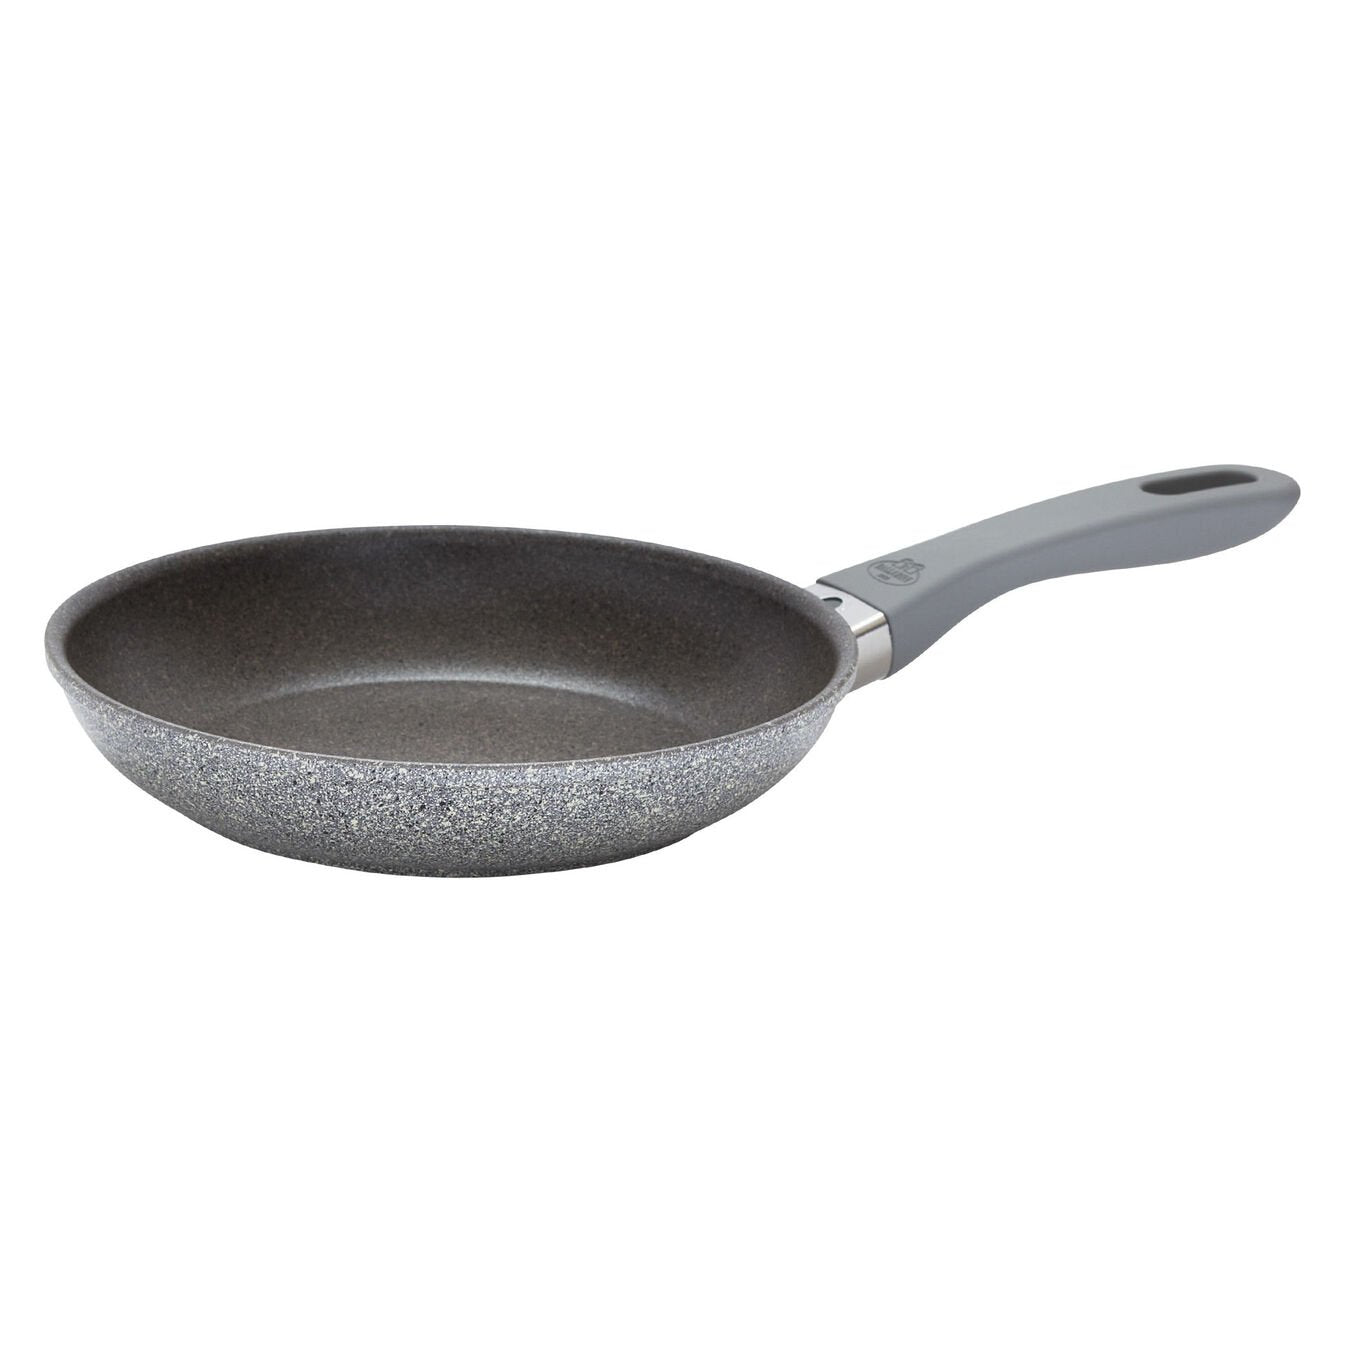 side view of the parma plus 8 inch nonstick fry pan on a white background